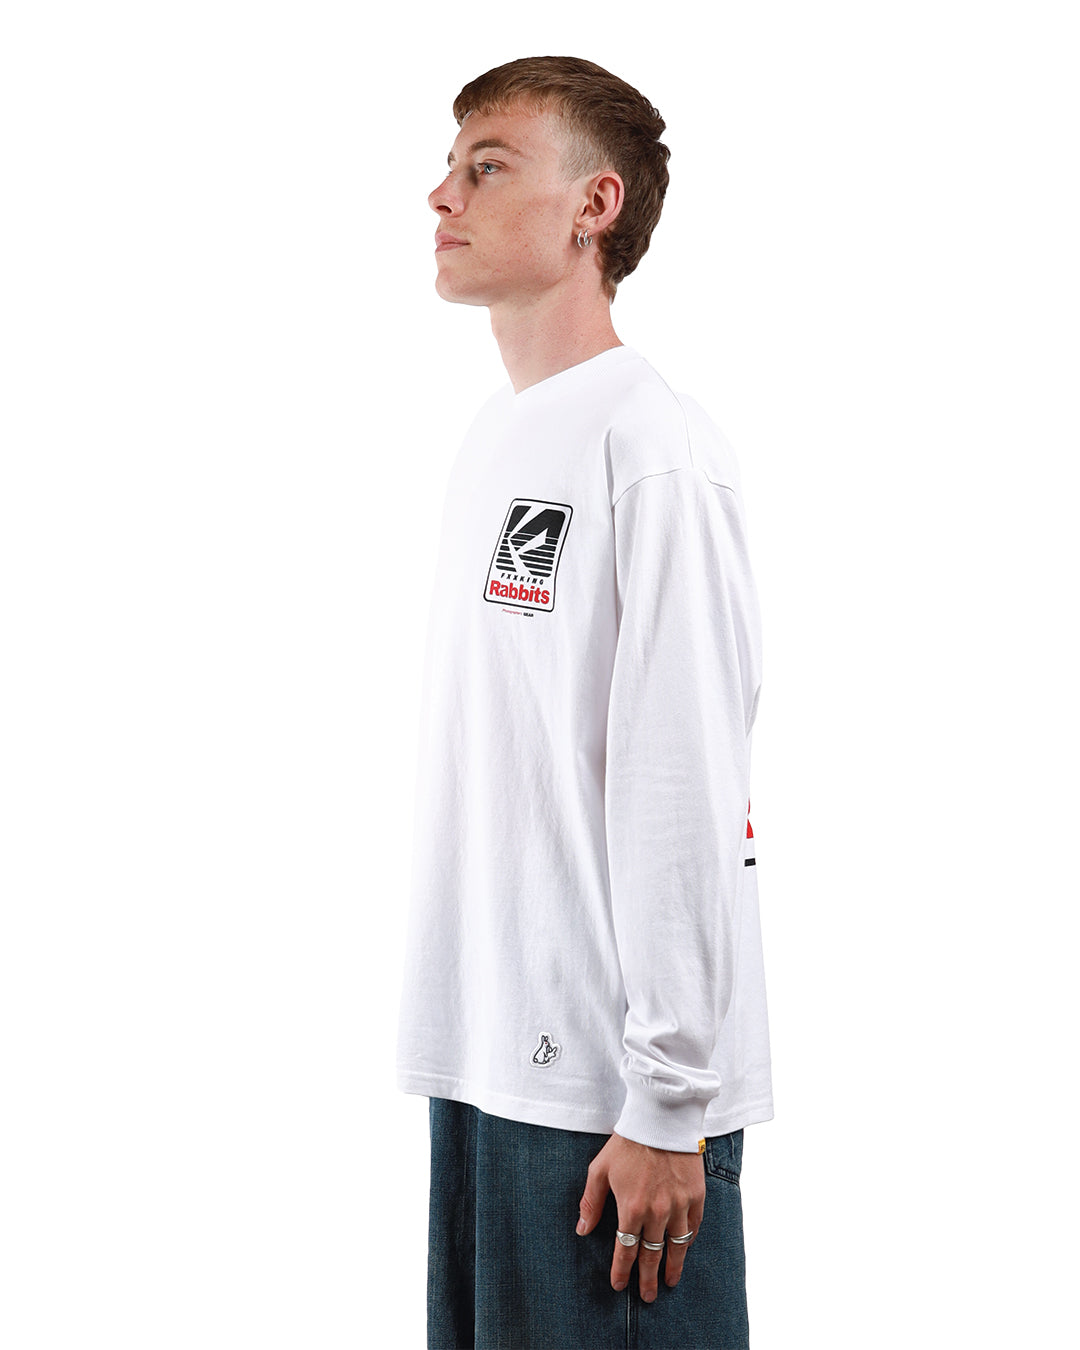 Fxxking Rabbits Photographers Gear L/S Tee White